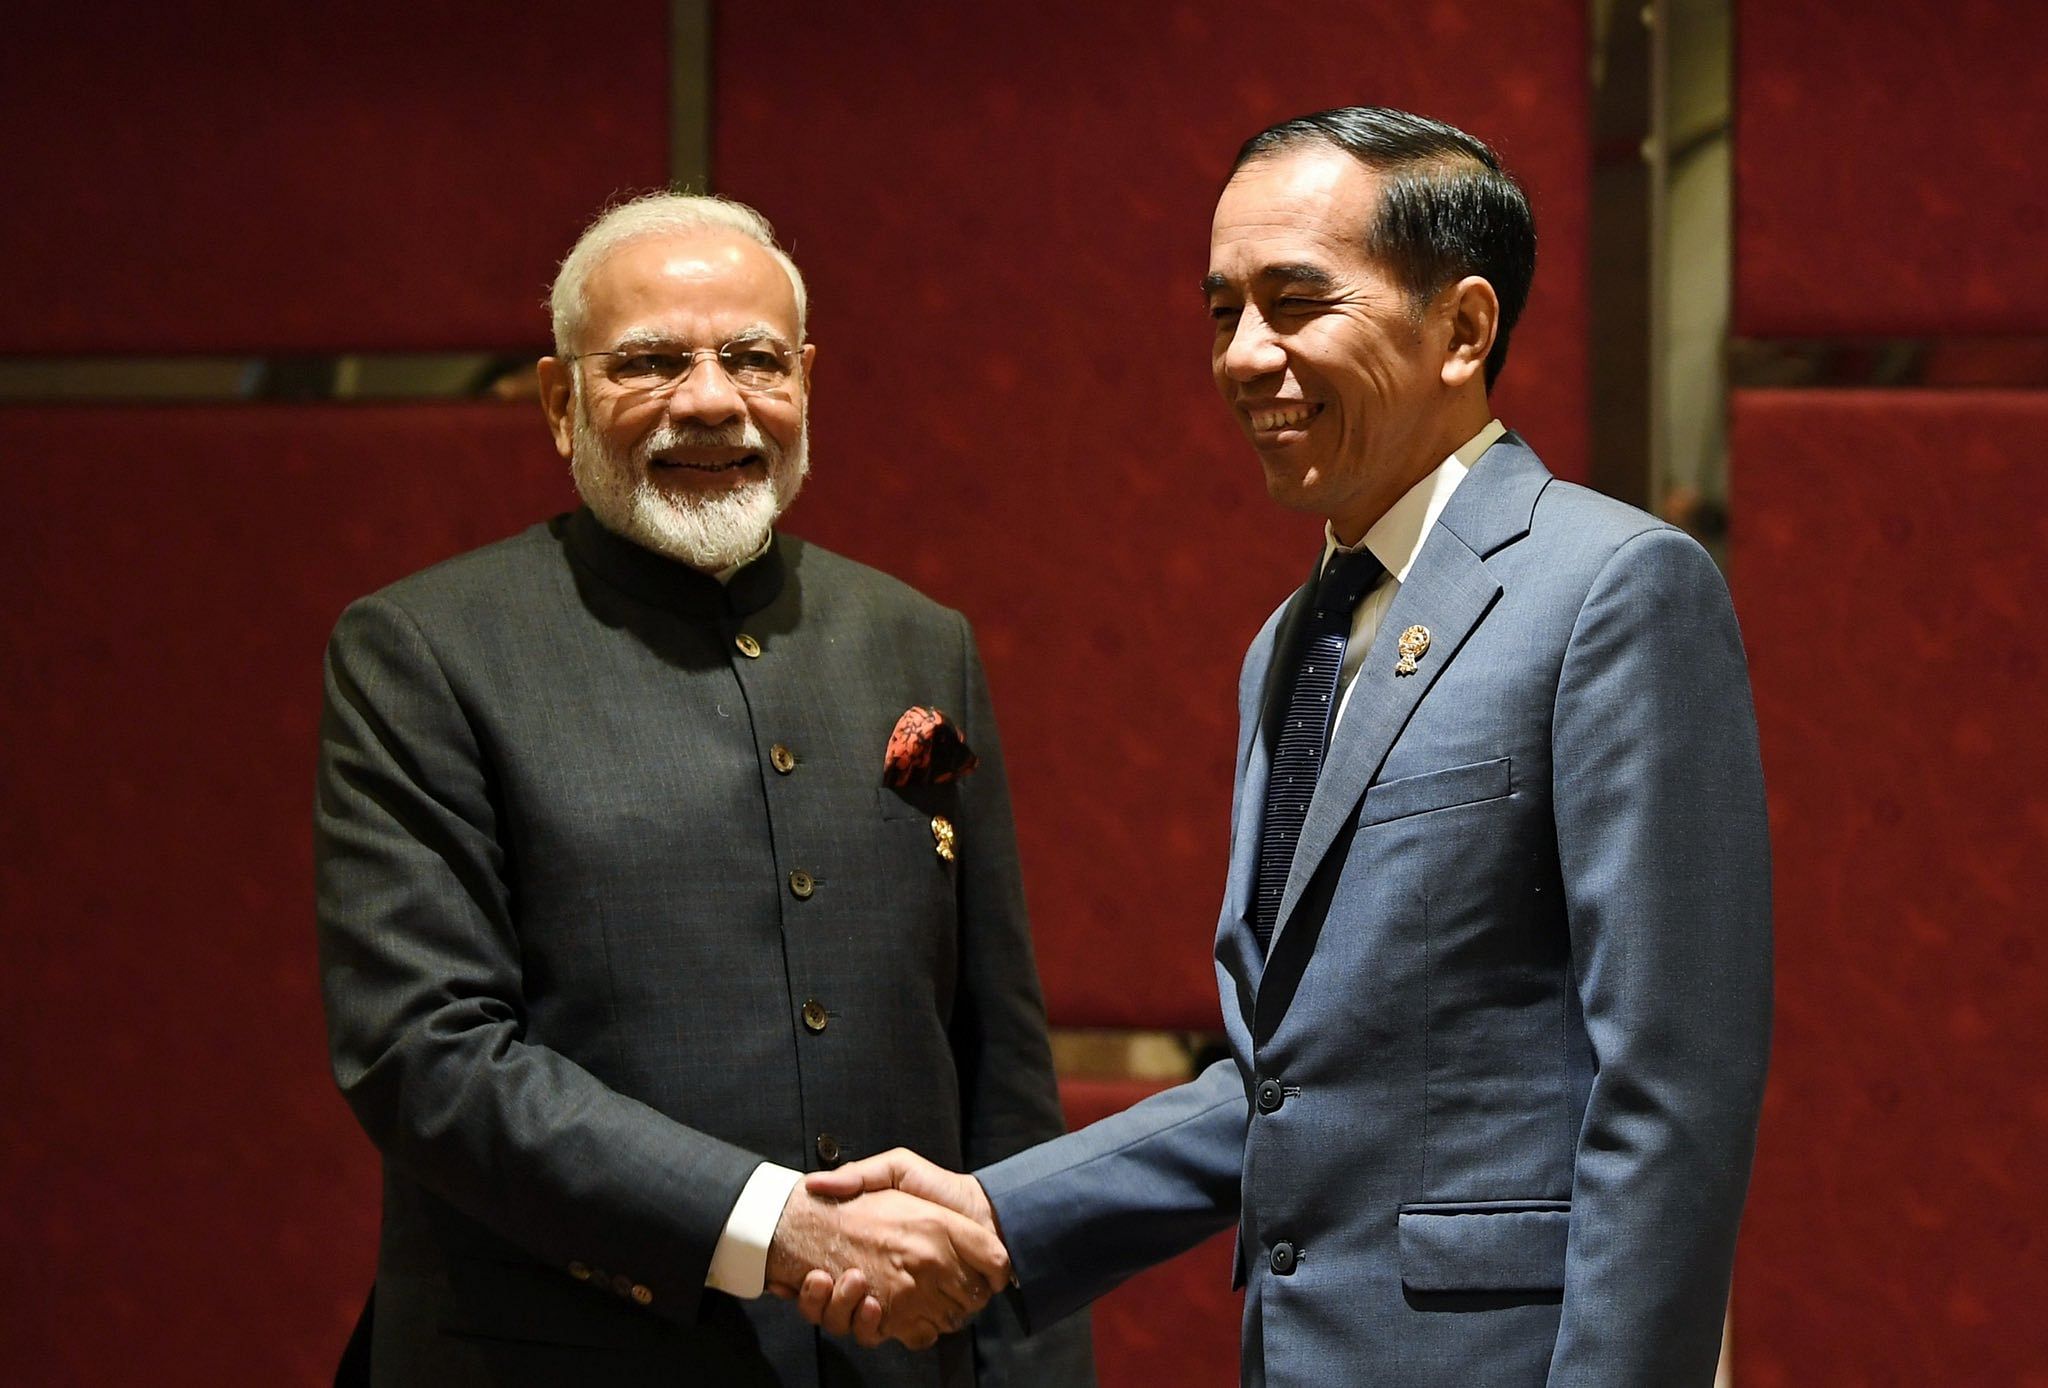 Noting that India and Indonesia are close maritime neighbours, both leaders reiterated their commitment to work together for peace, security, and prosperity in the Indo-Pacific region. Photo/Twitter (@narendramodi)